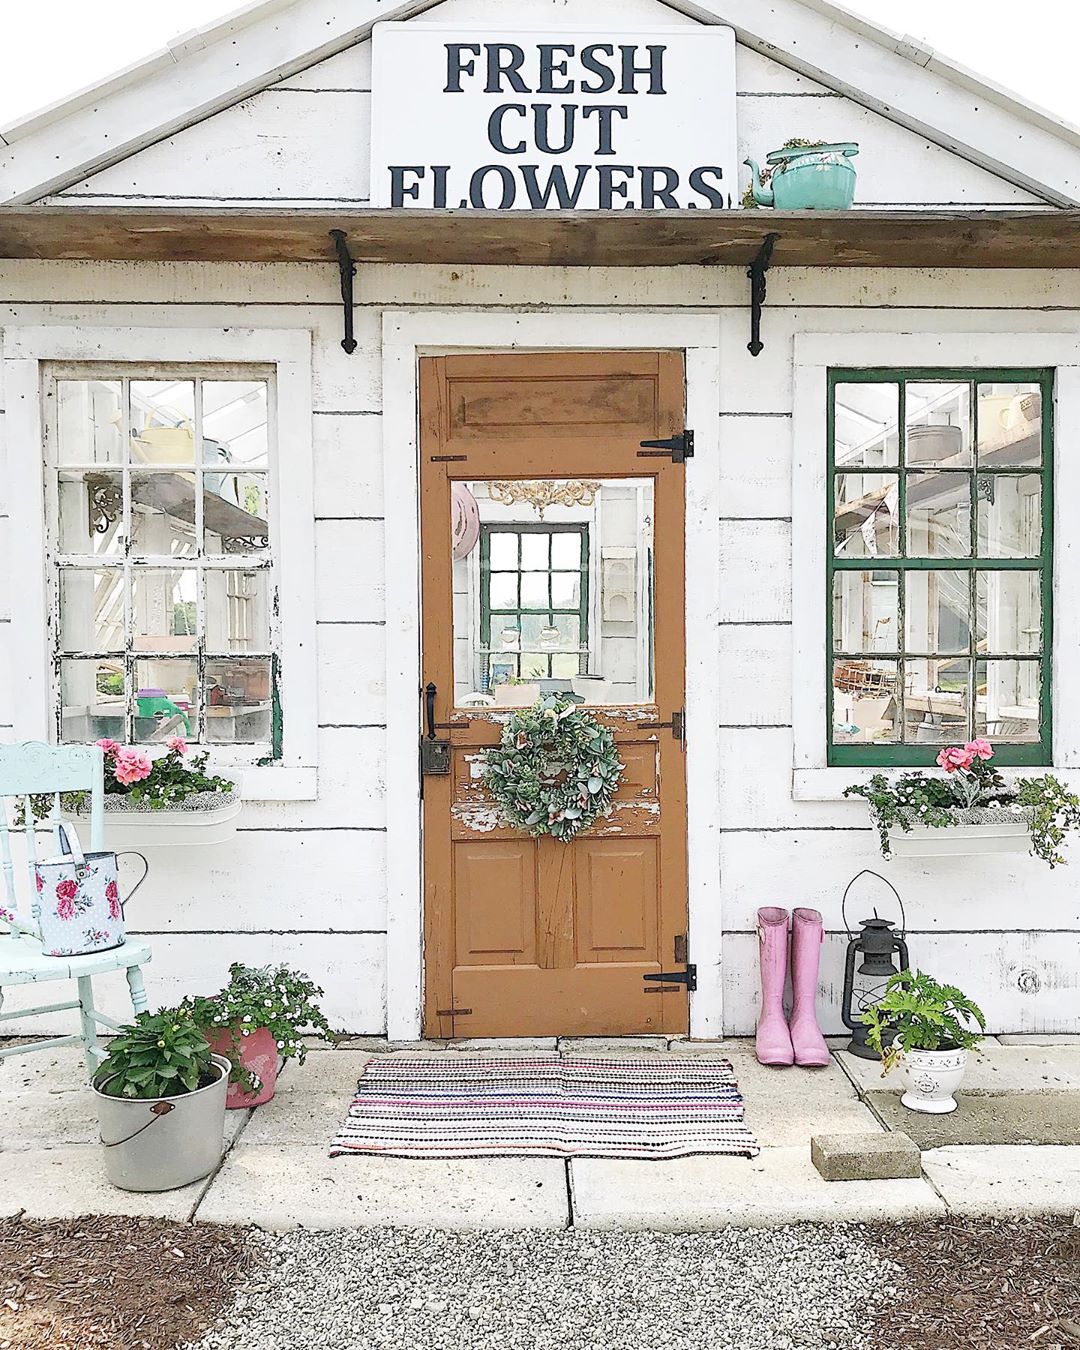 White, Weathered She Shed with Fresh Cut Flowers Sign. Photo by Instagram user @tracey_hiebert